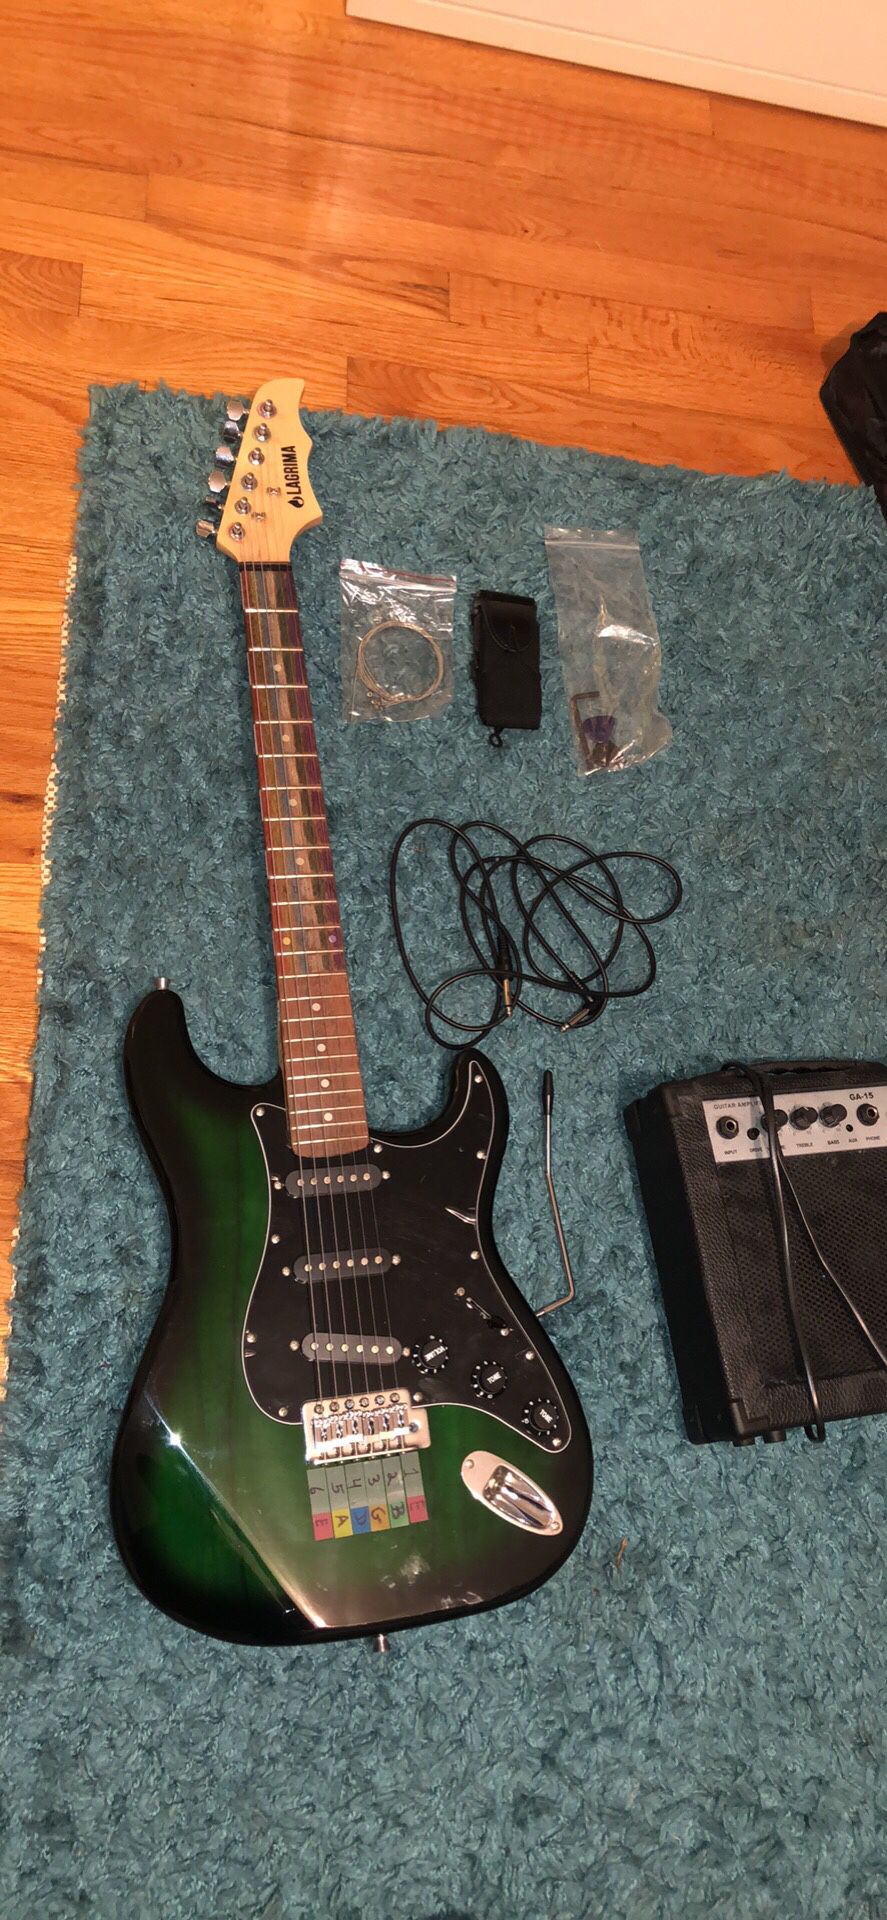 Nearly brand new guitar and accessories